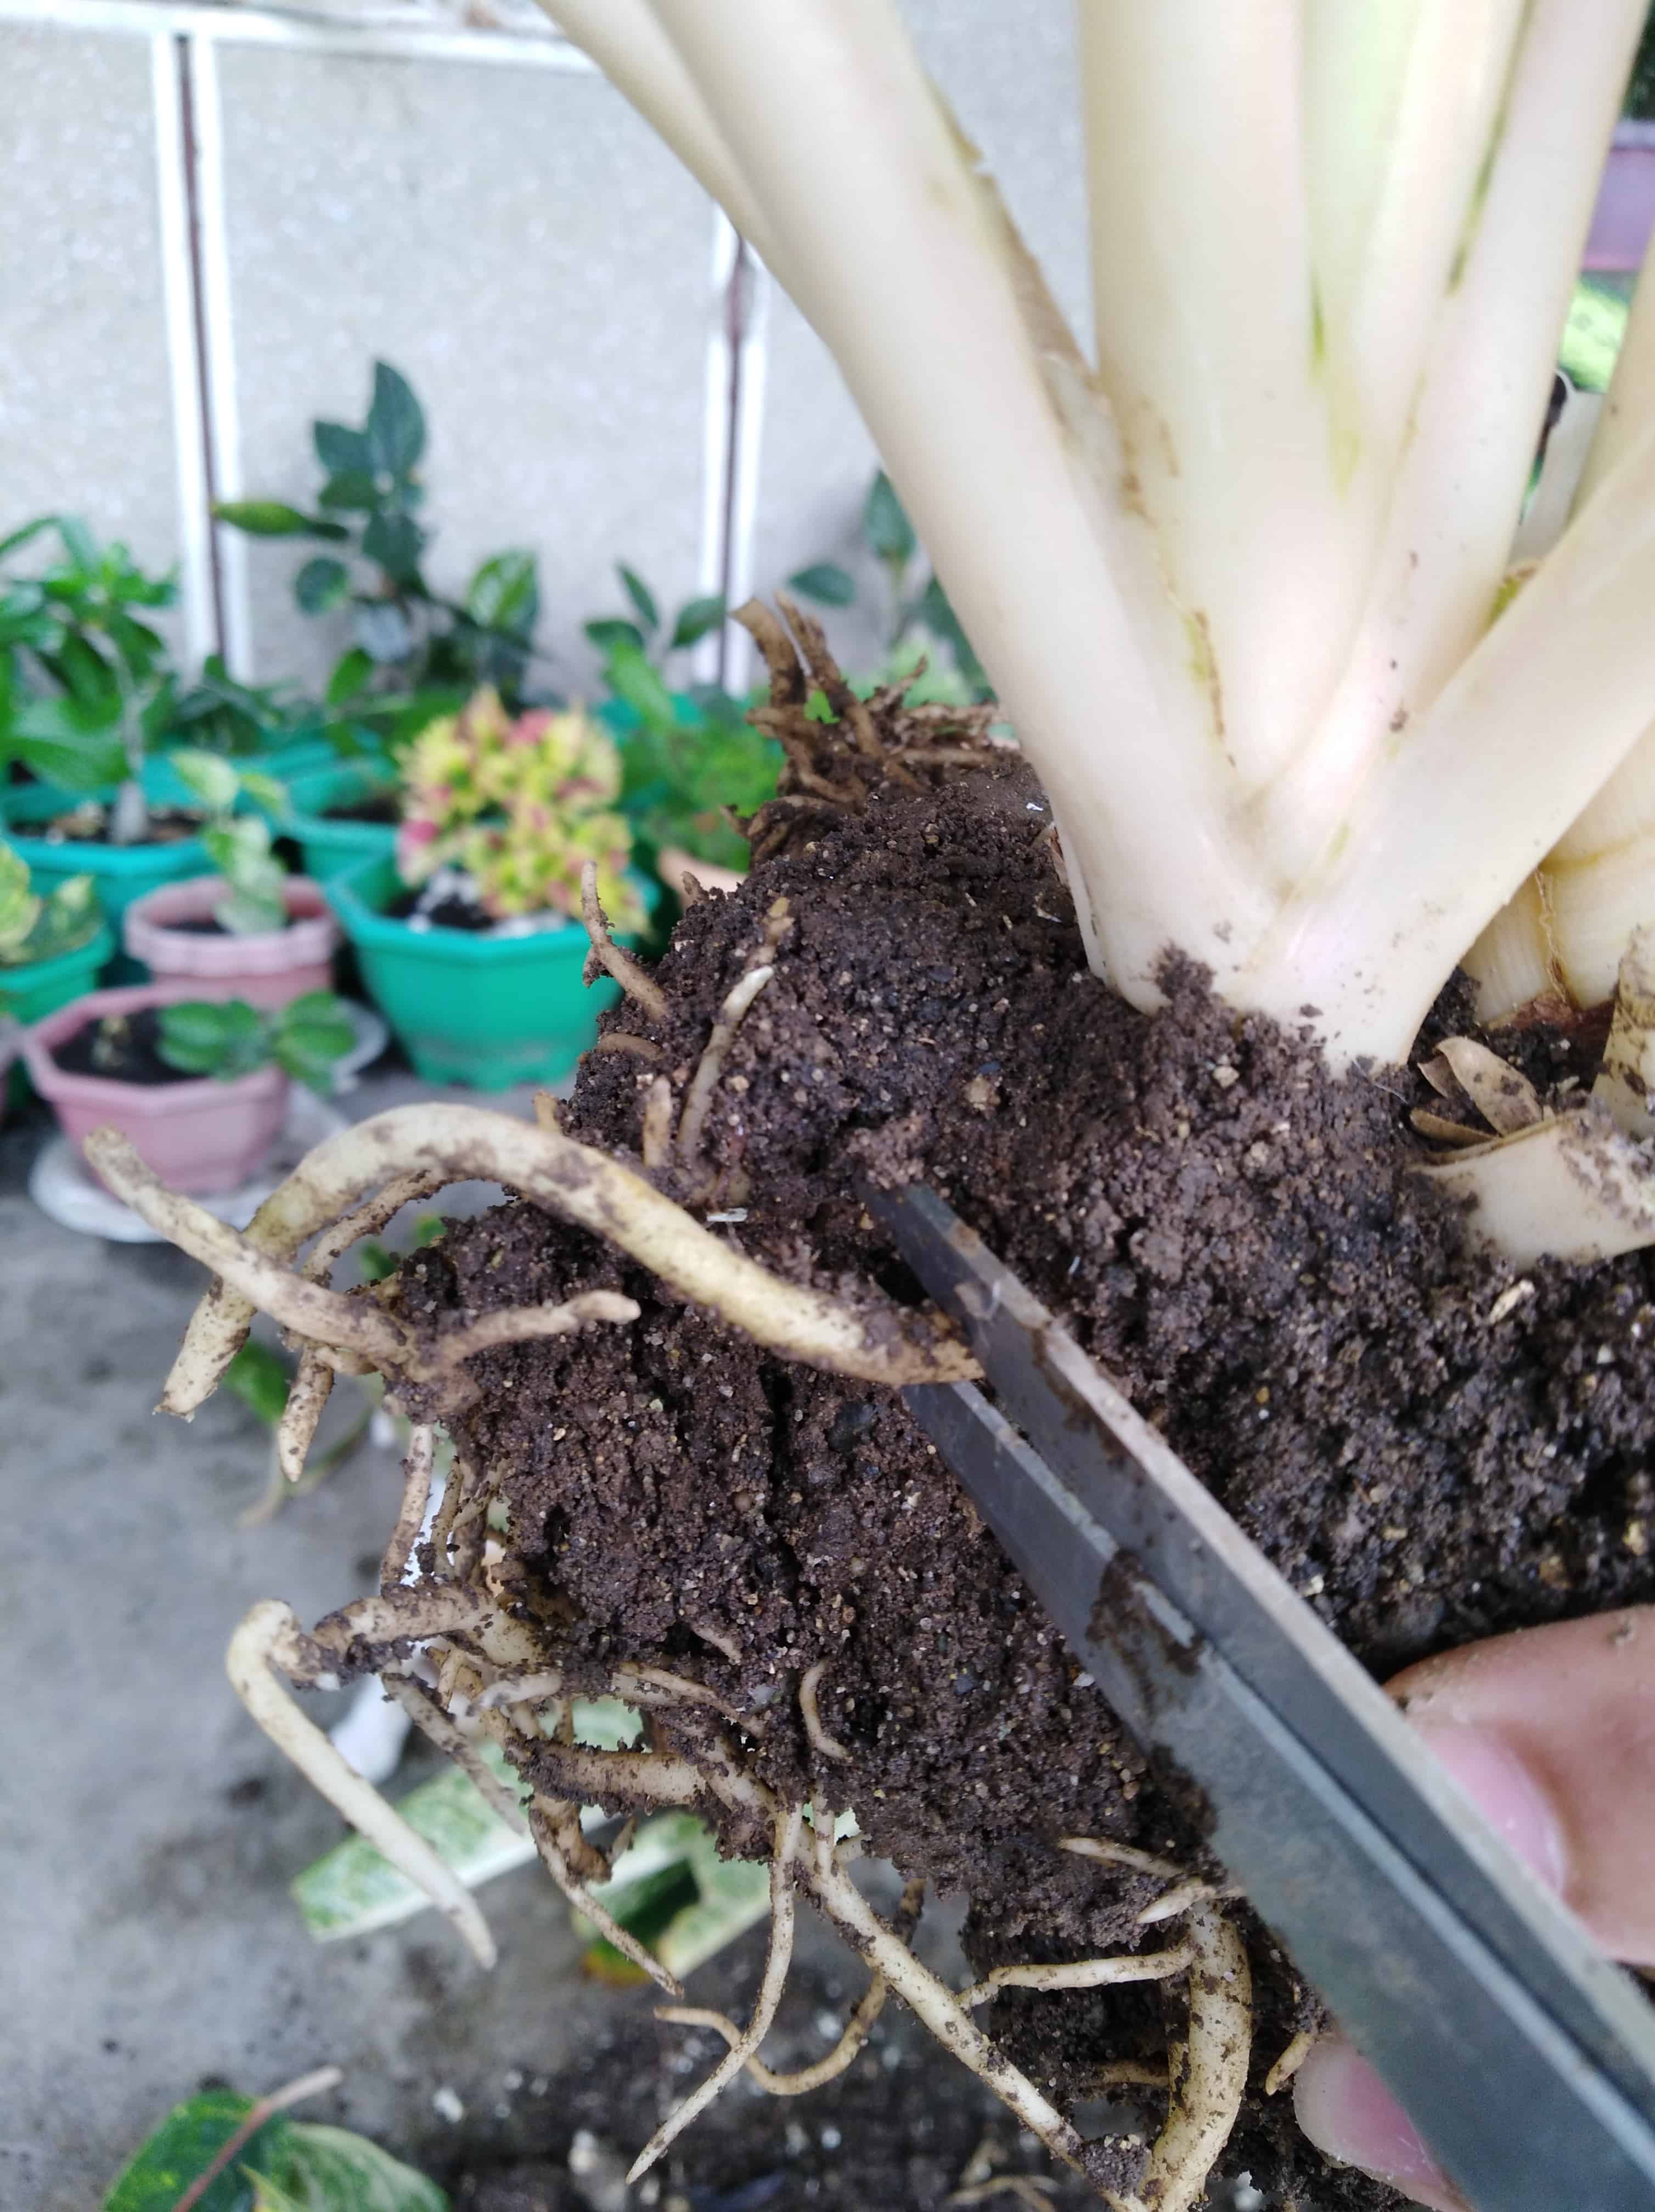 Cutting off roots for propagation